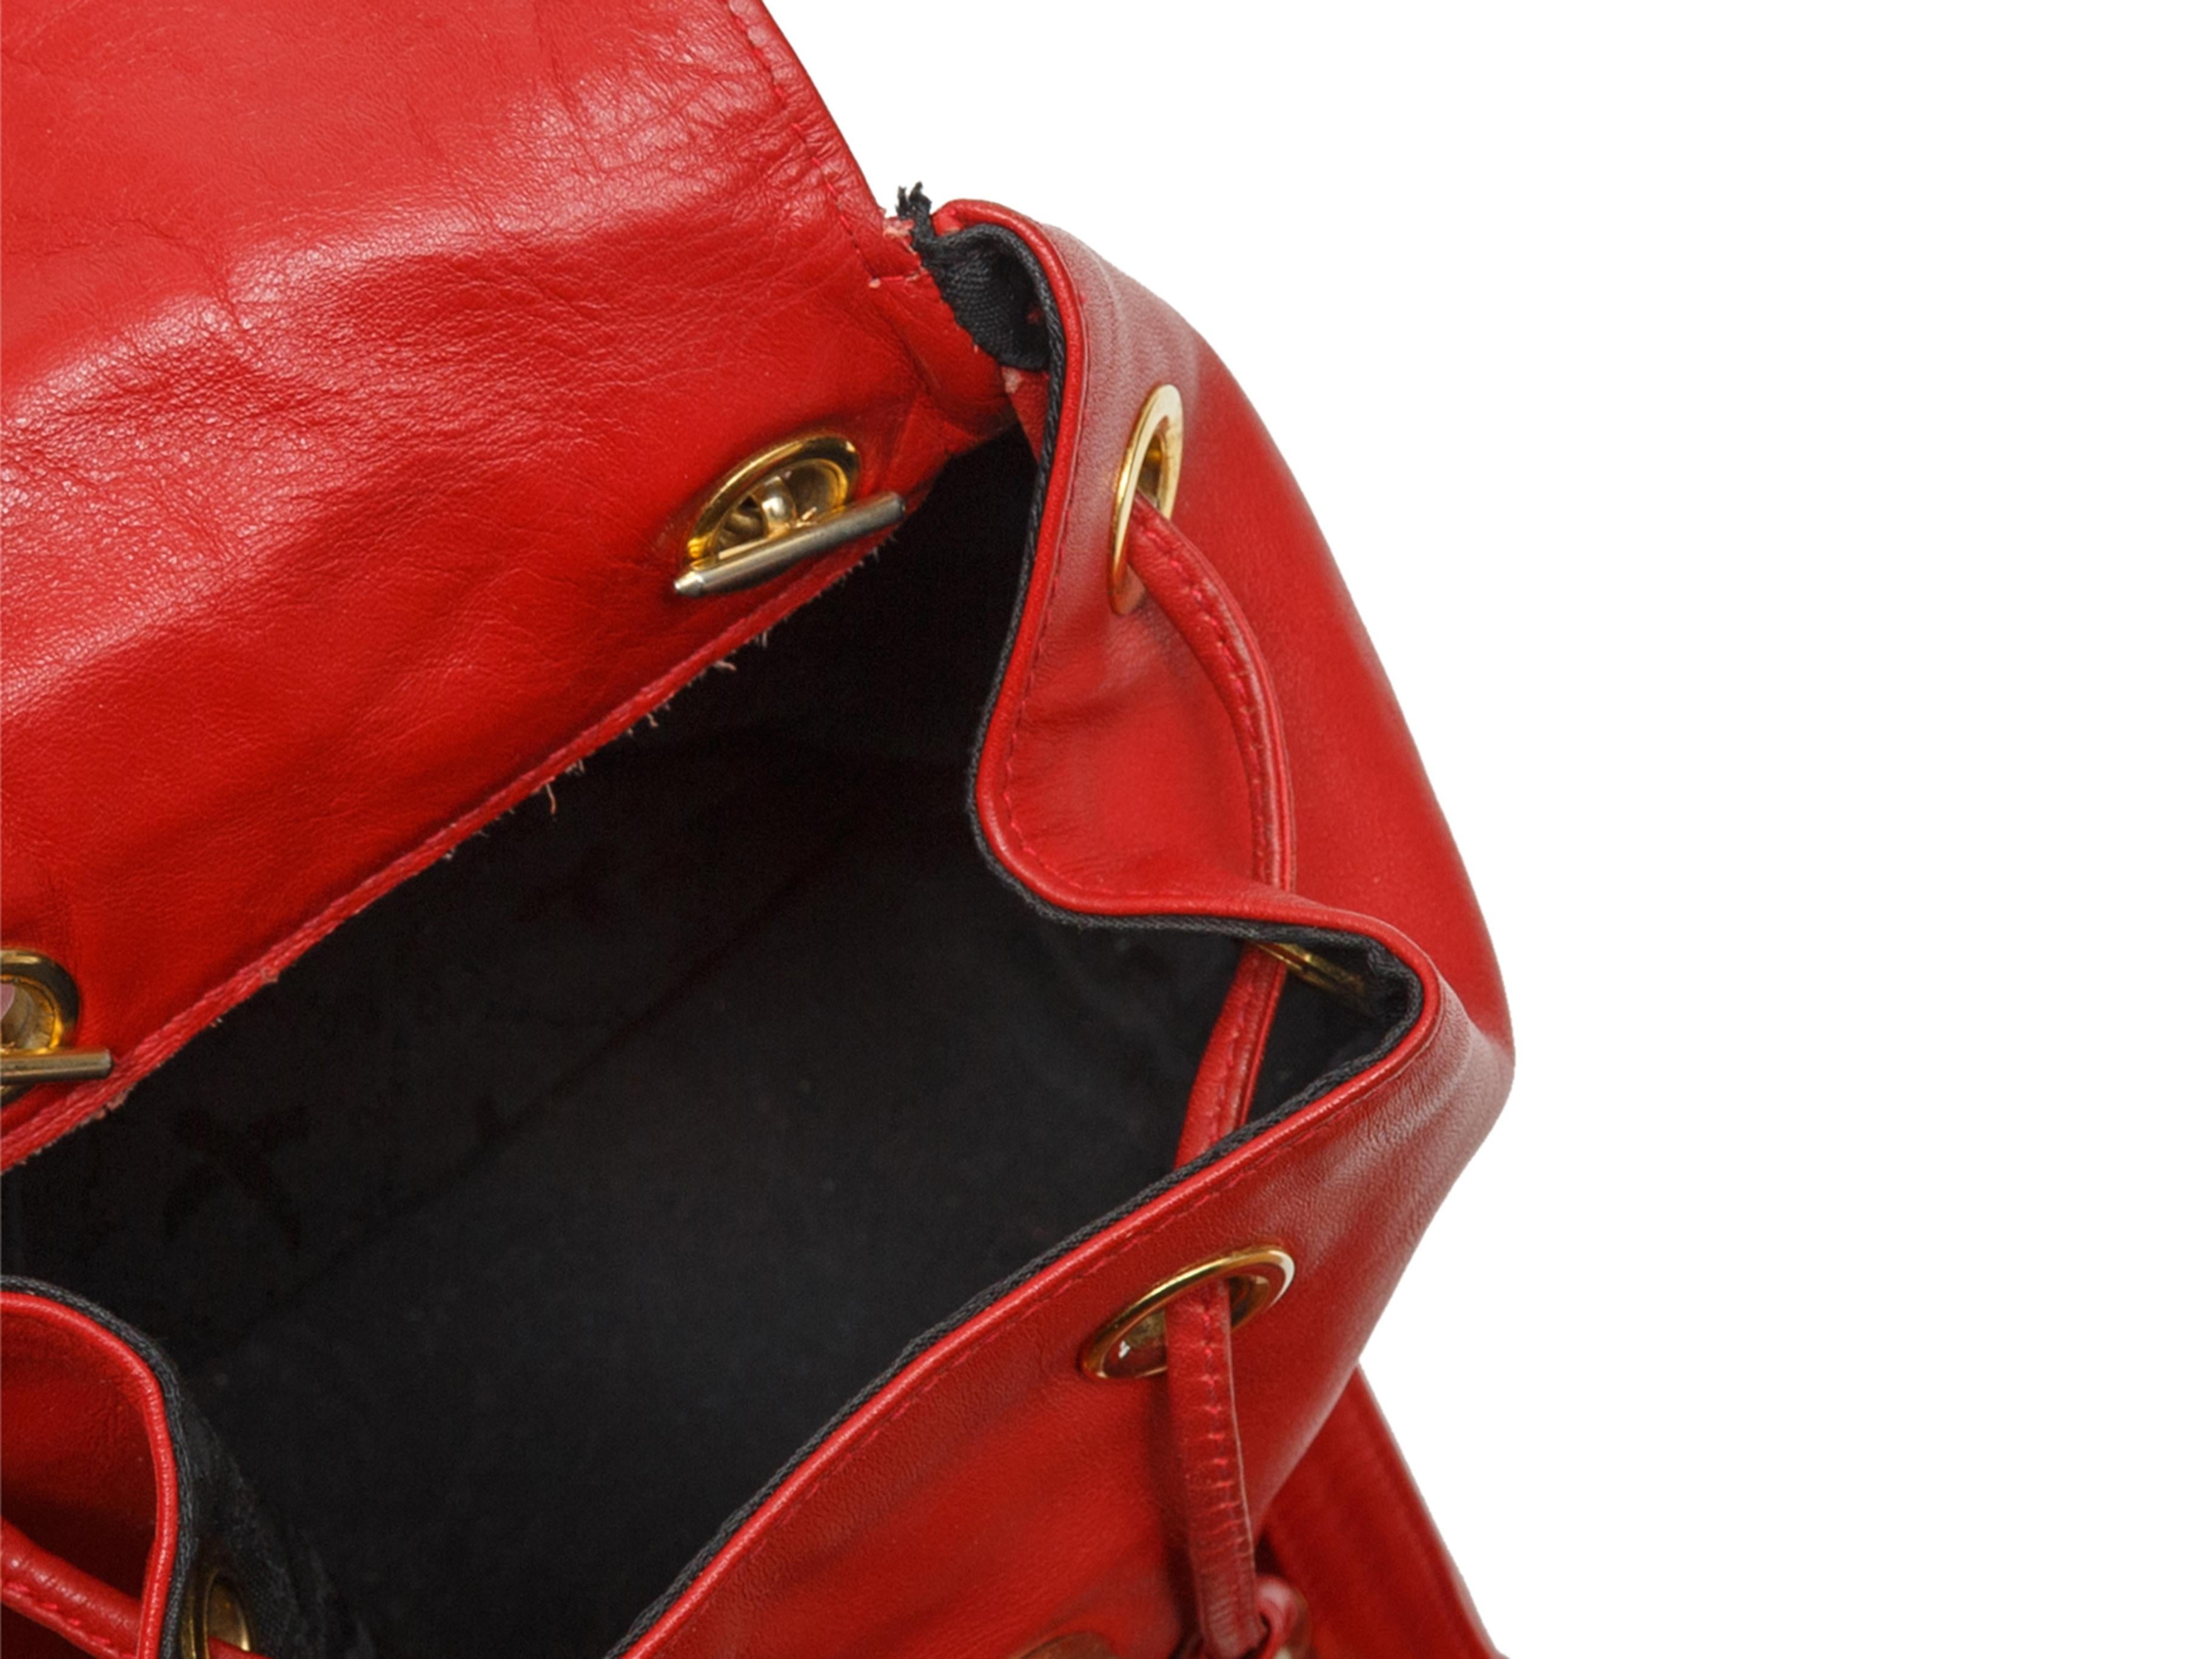 red leather backpack